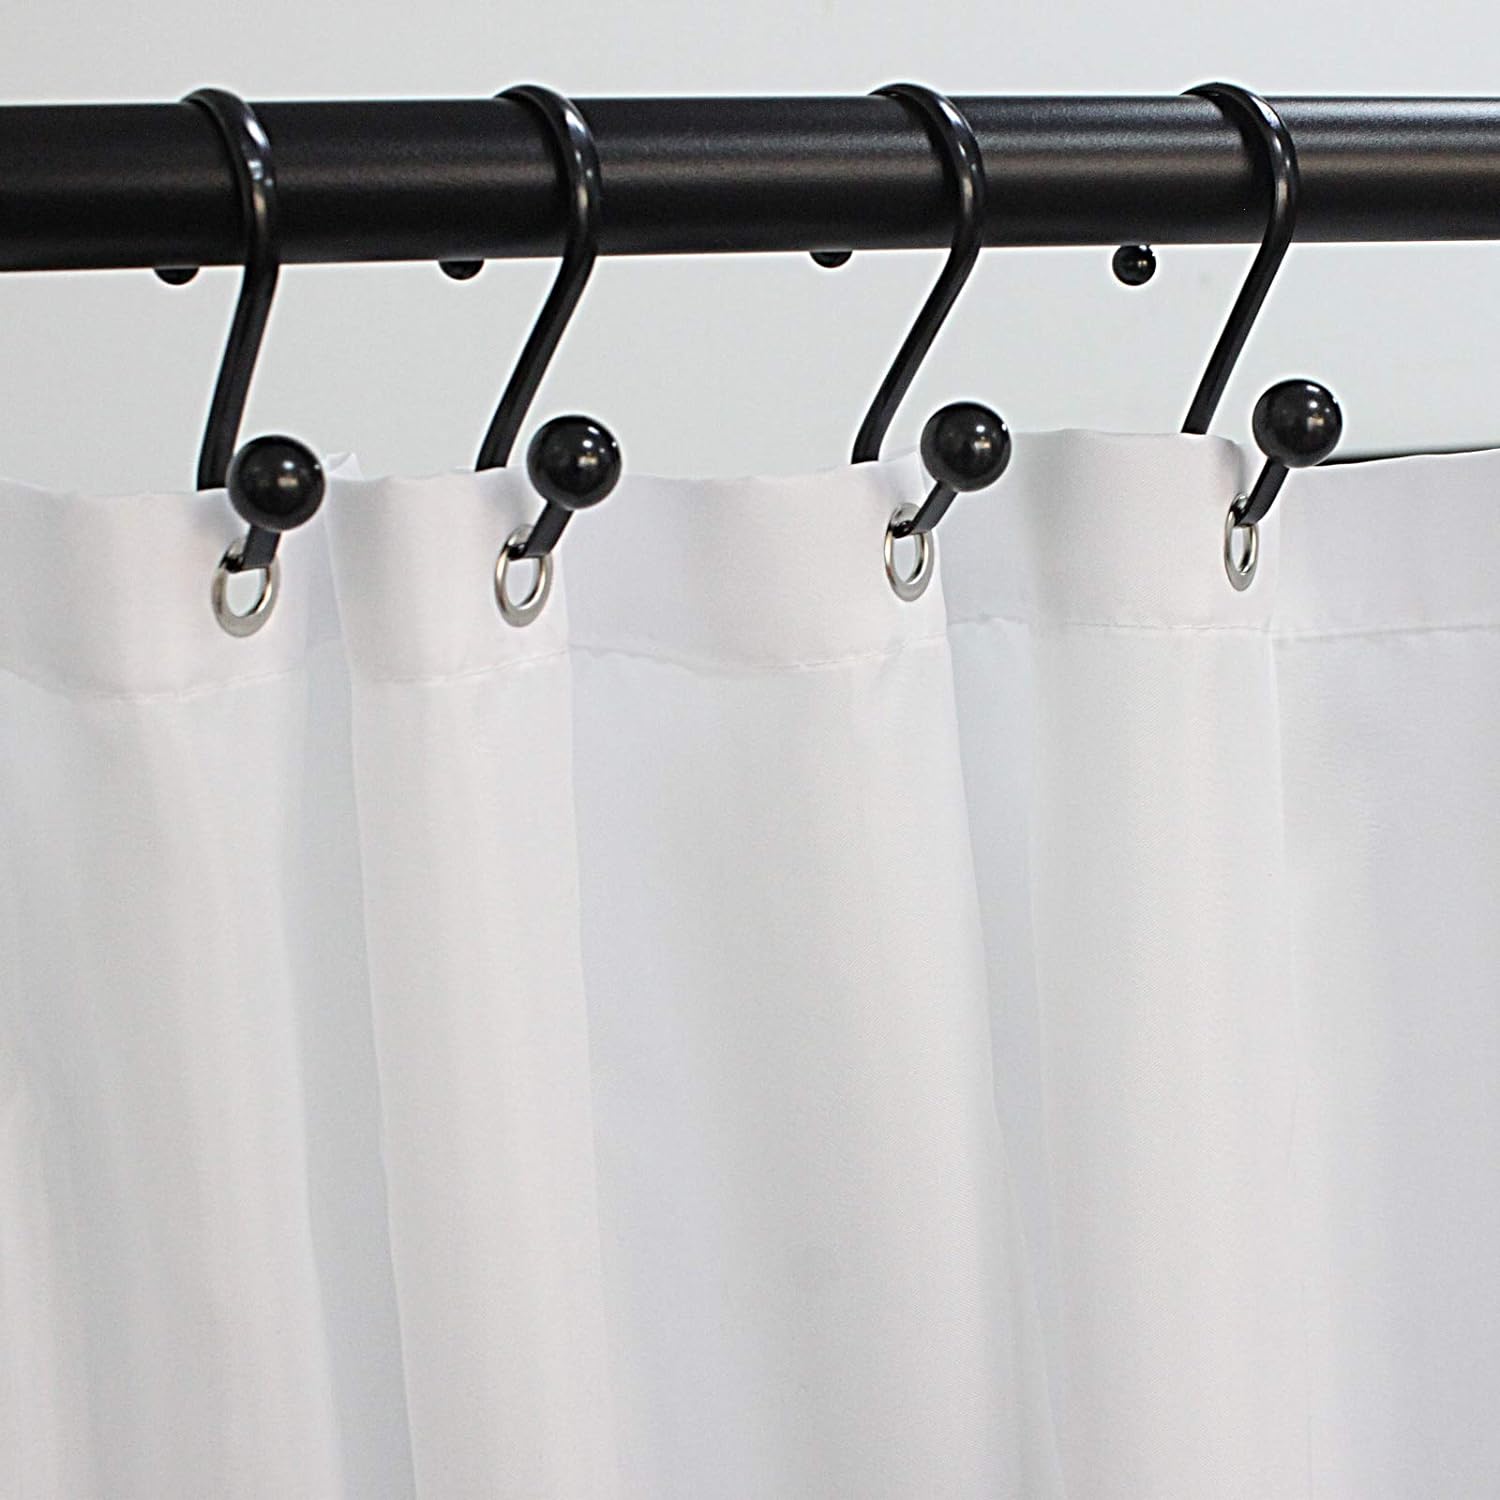 Finros Shower Curtain Rings Durable, Shower Curtain Rings Silver